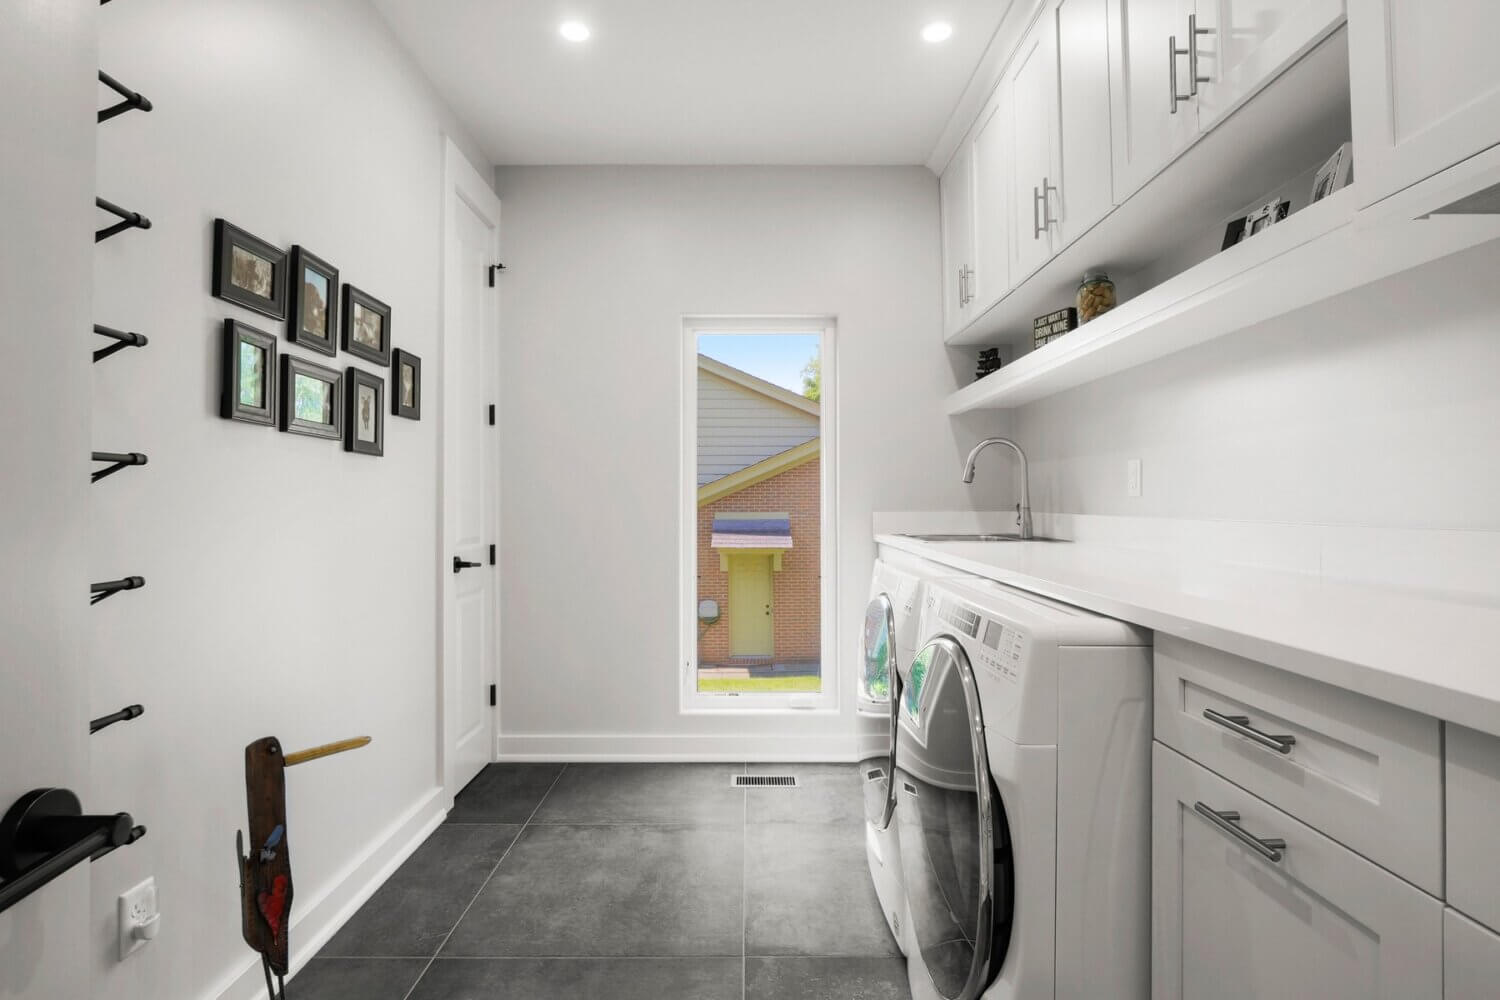 An all-white and bright laundry room with simple, sophisticated cabinets from Dura Supreme Cabinetry in a white painted finish. Dark gray tiles on the floor add contrast to the space.